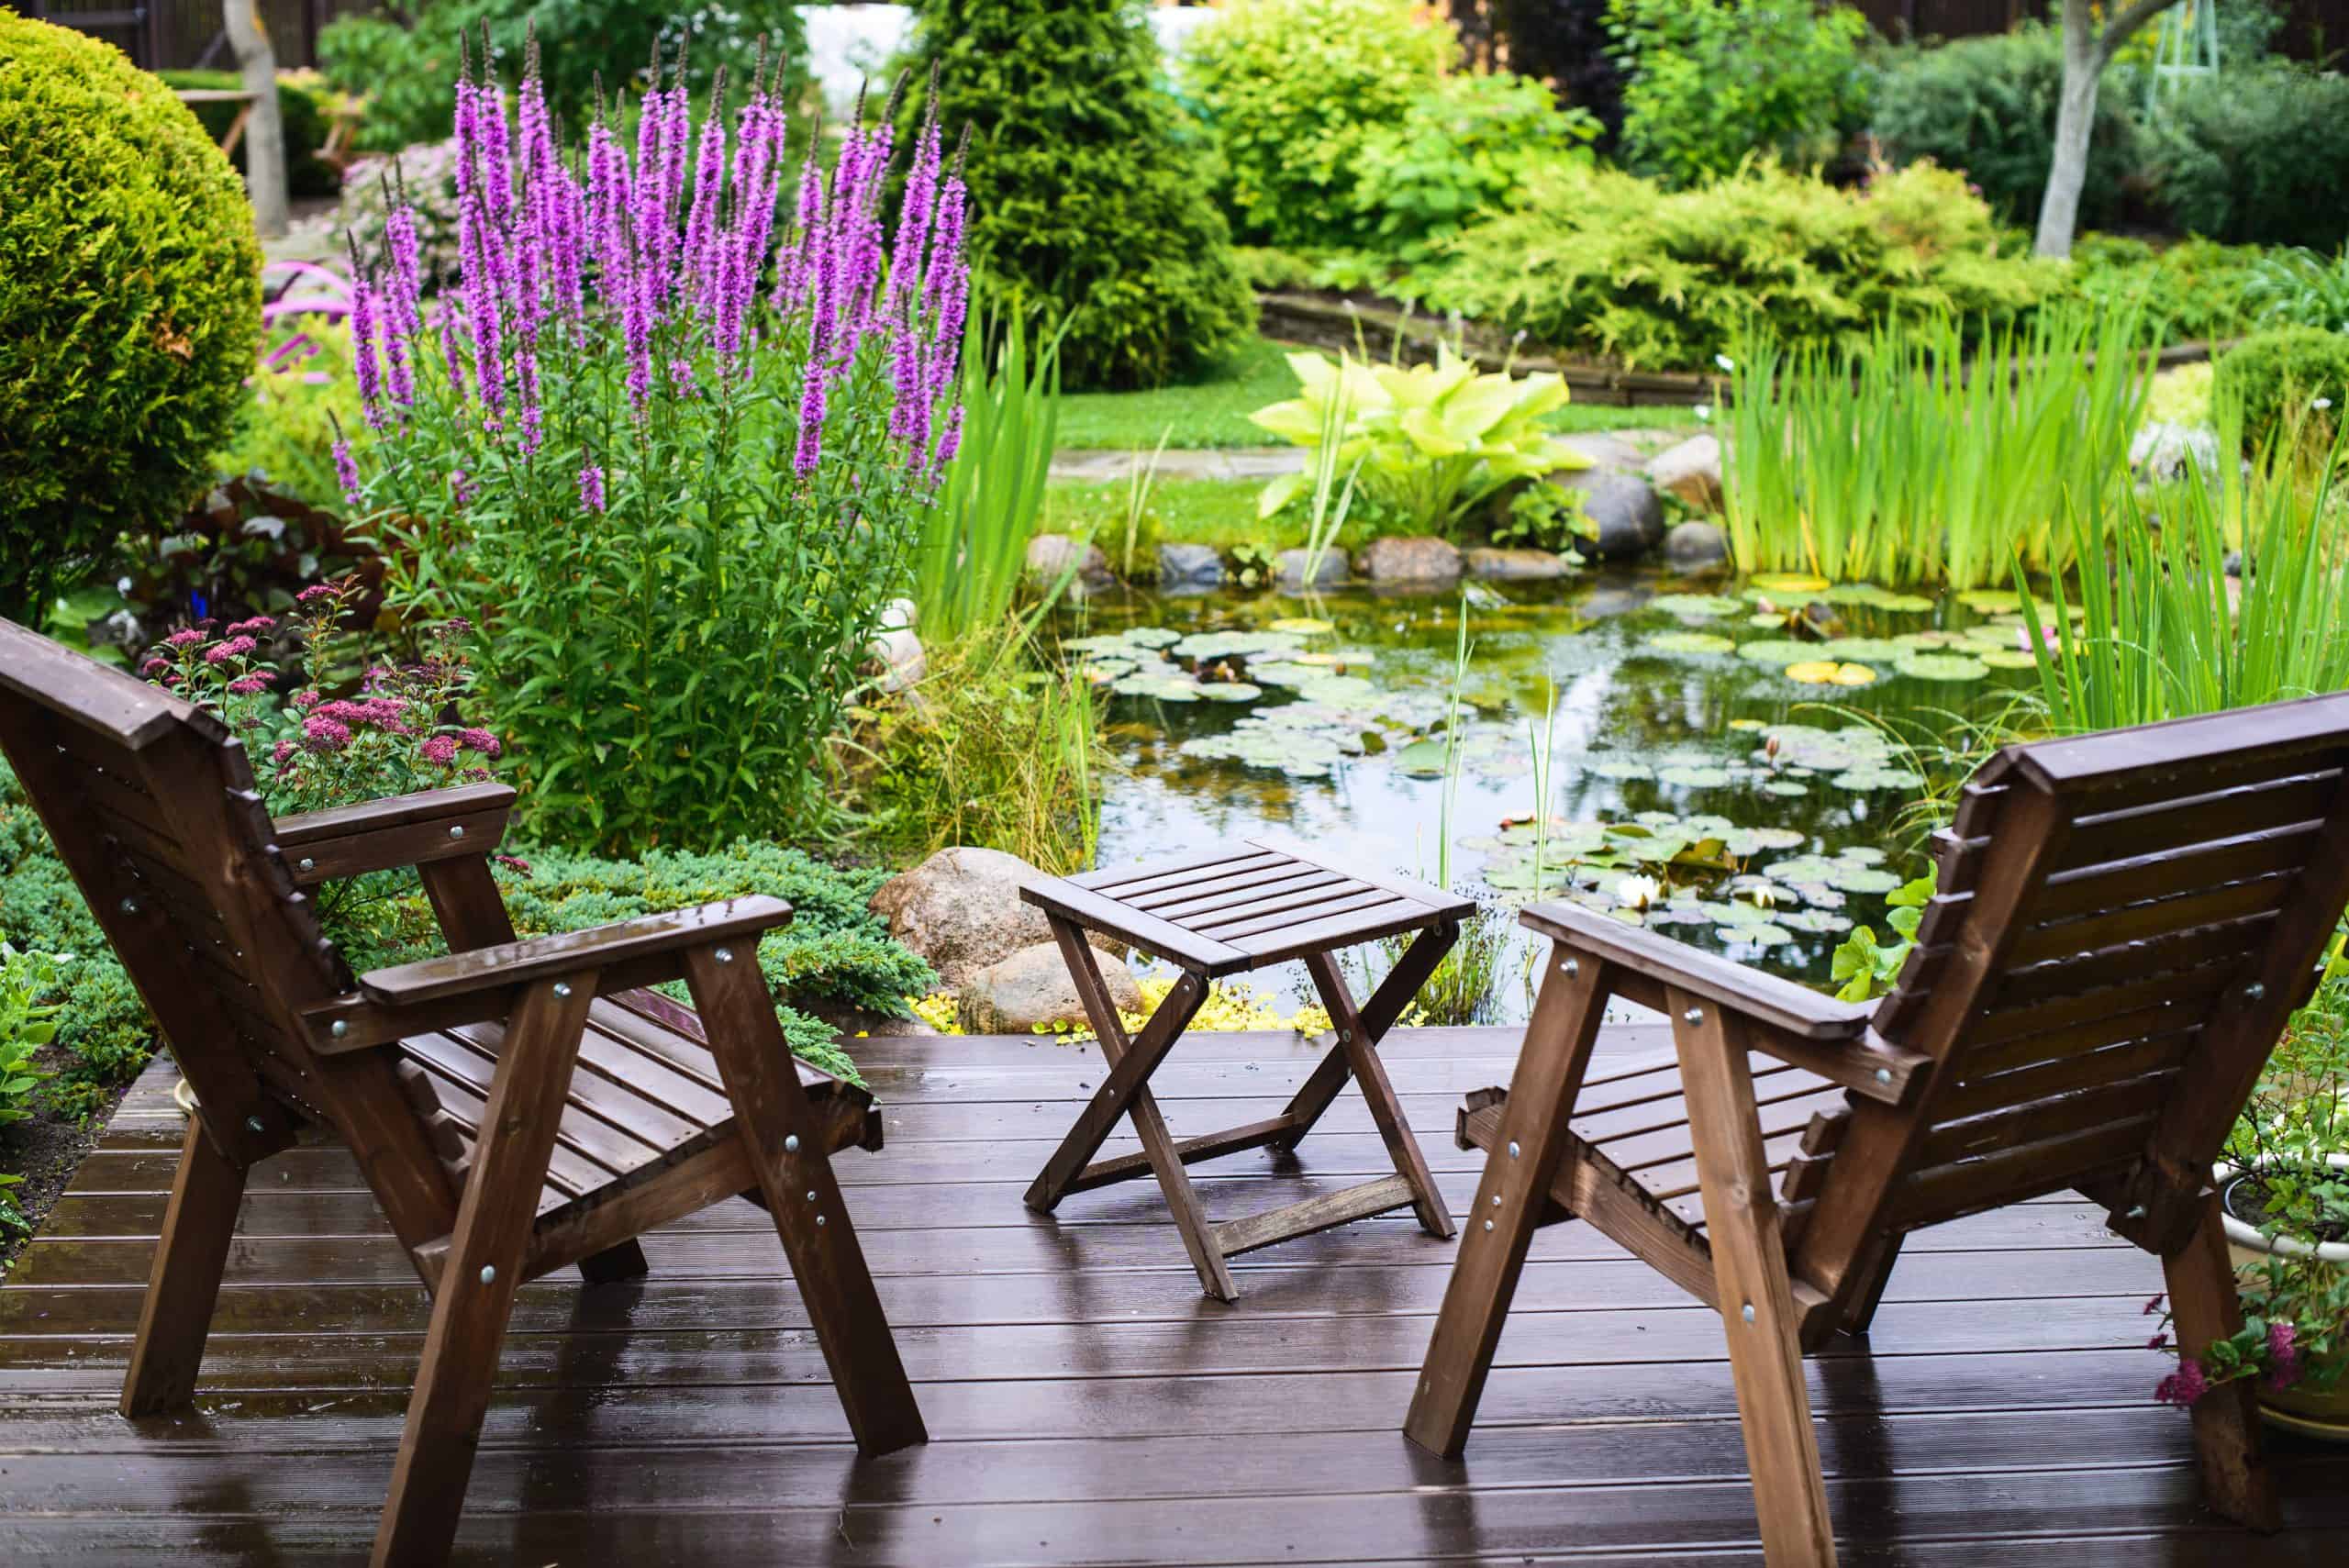 Pond in the garden – how to make it?